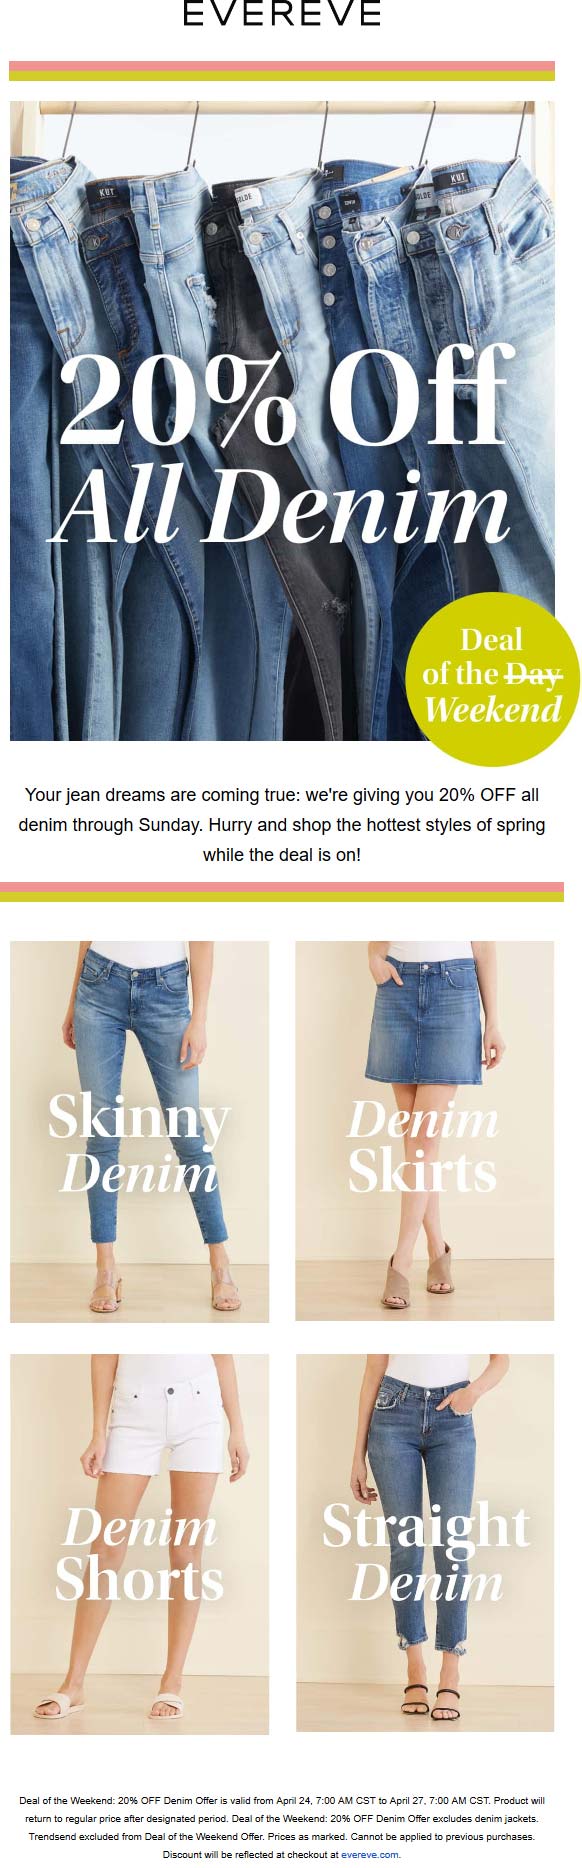 Evereve stores Coupon  20% off all denim at Evereve (04/26)